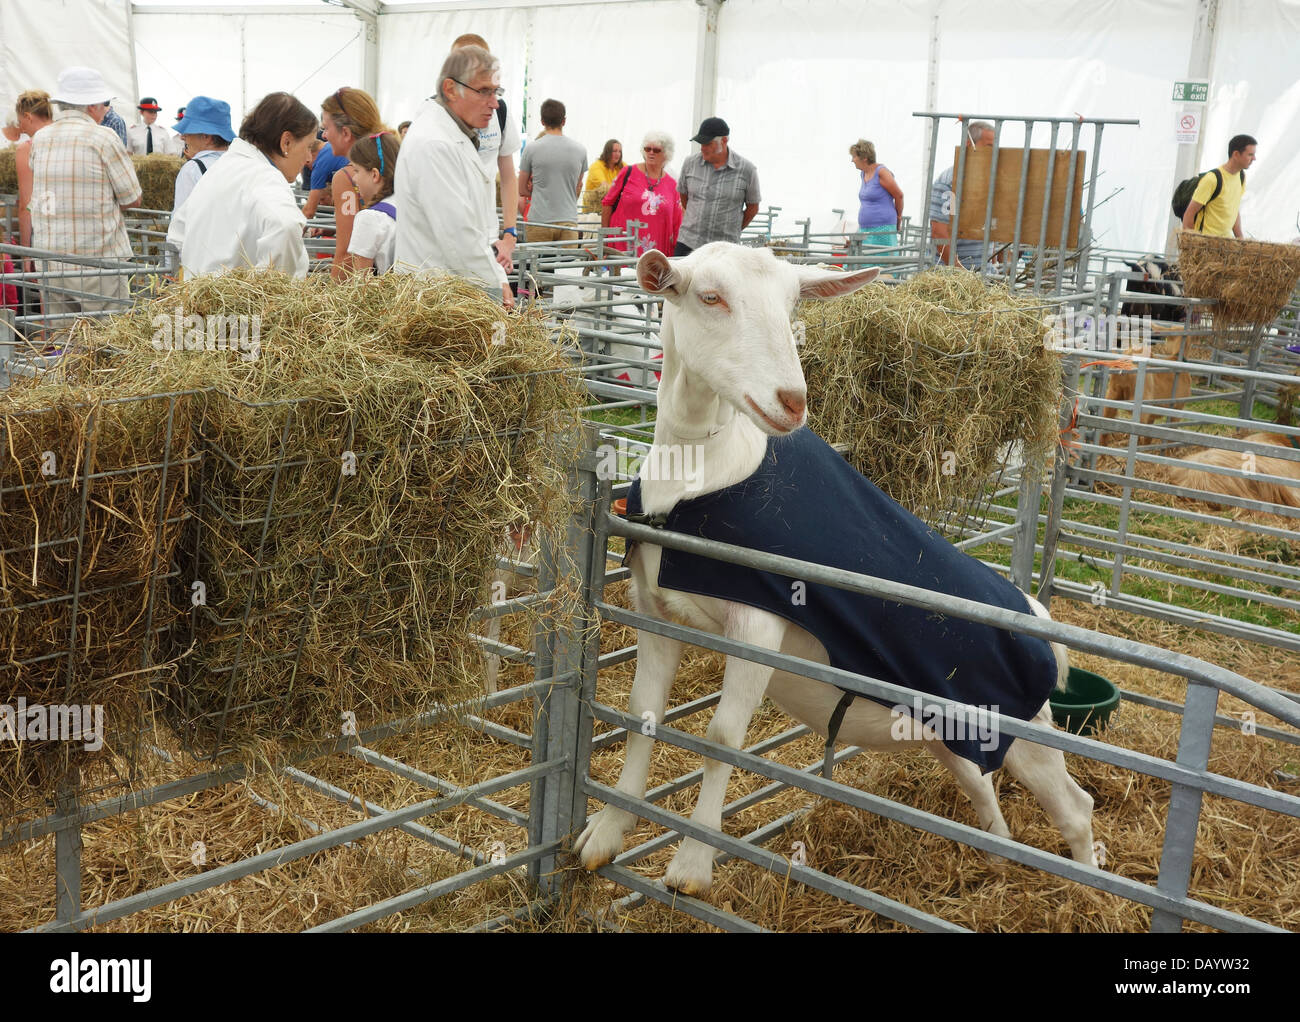 A goat in a pen at Stithians livestock and agricultural show, Cornwall, UK Stock Photo